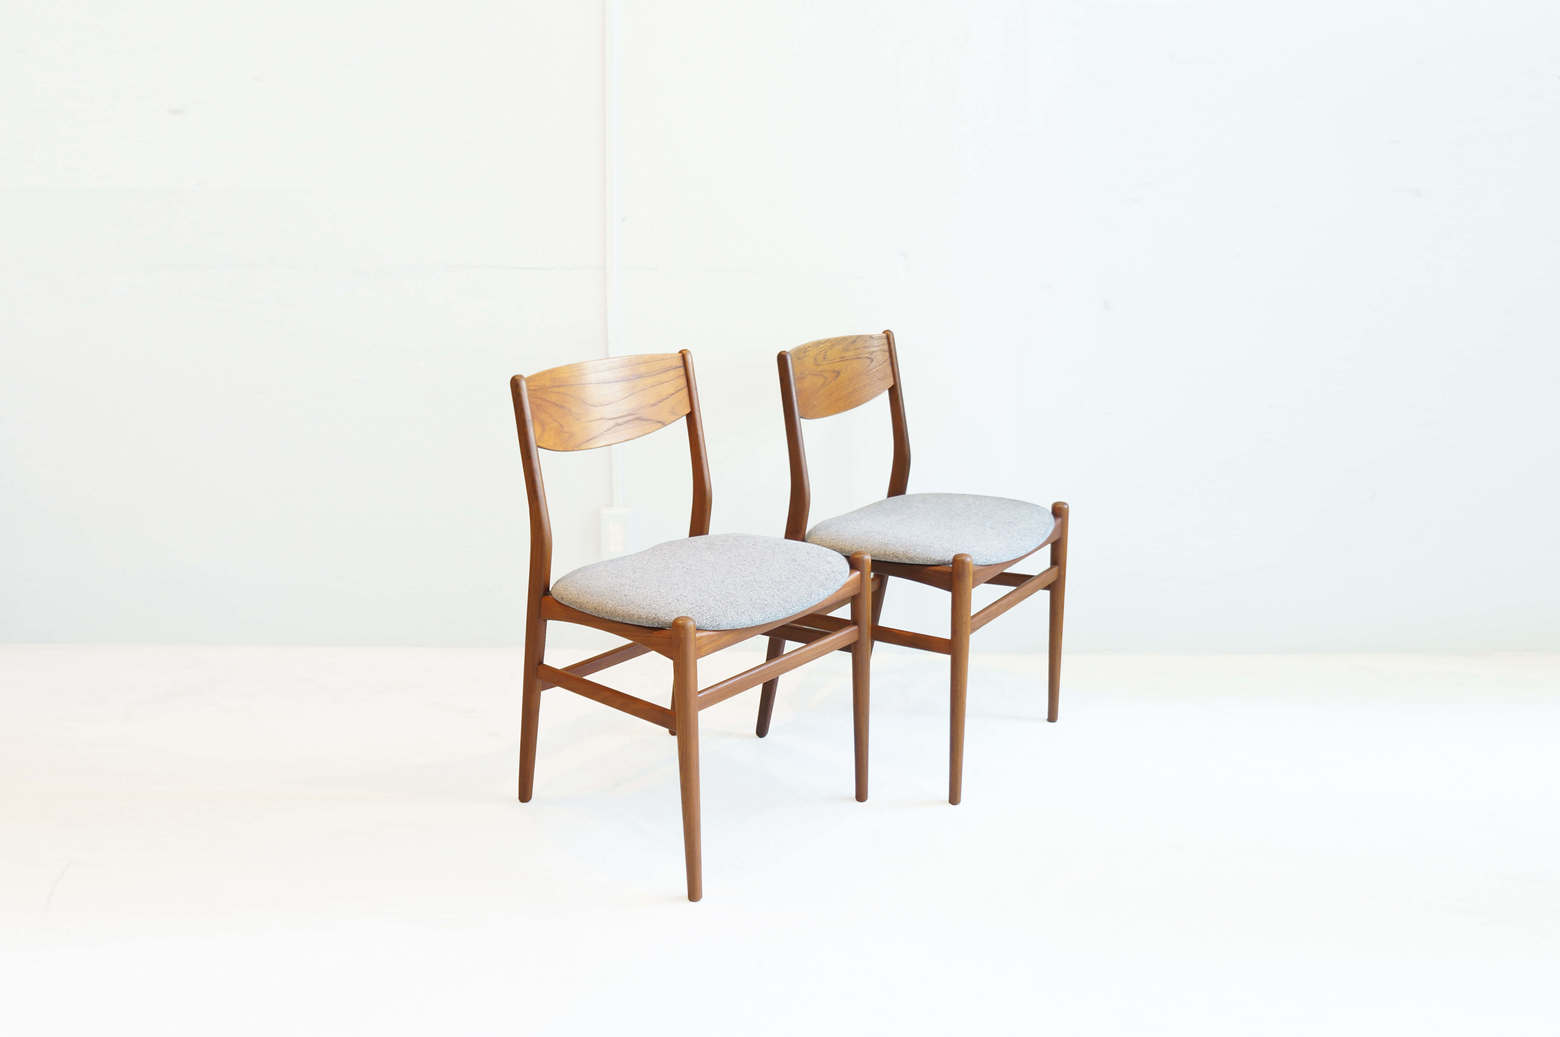 Danish Vintage Dining Chair/デンマーク ヴィンテージ ダイニングチェア 2